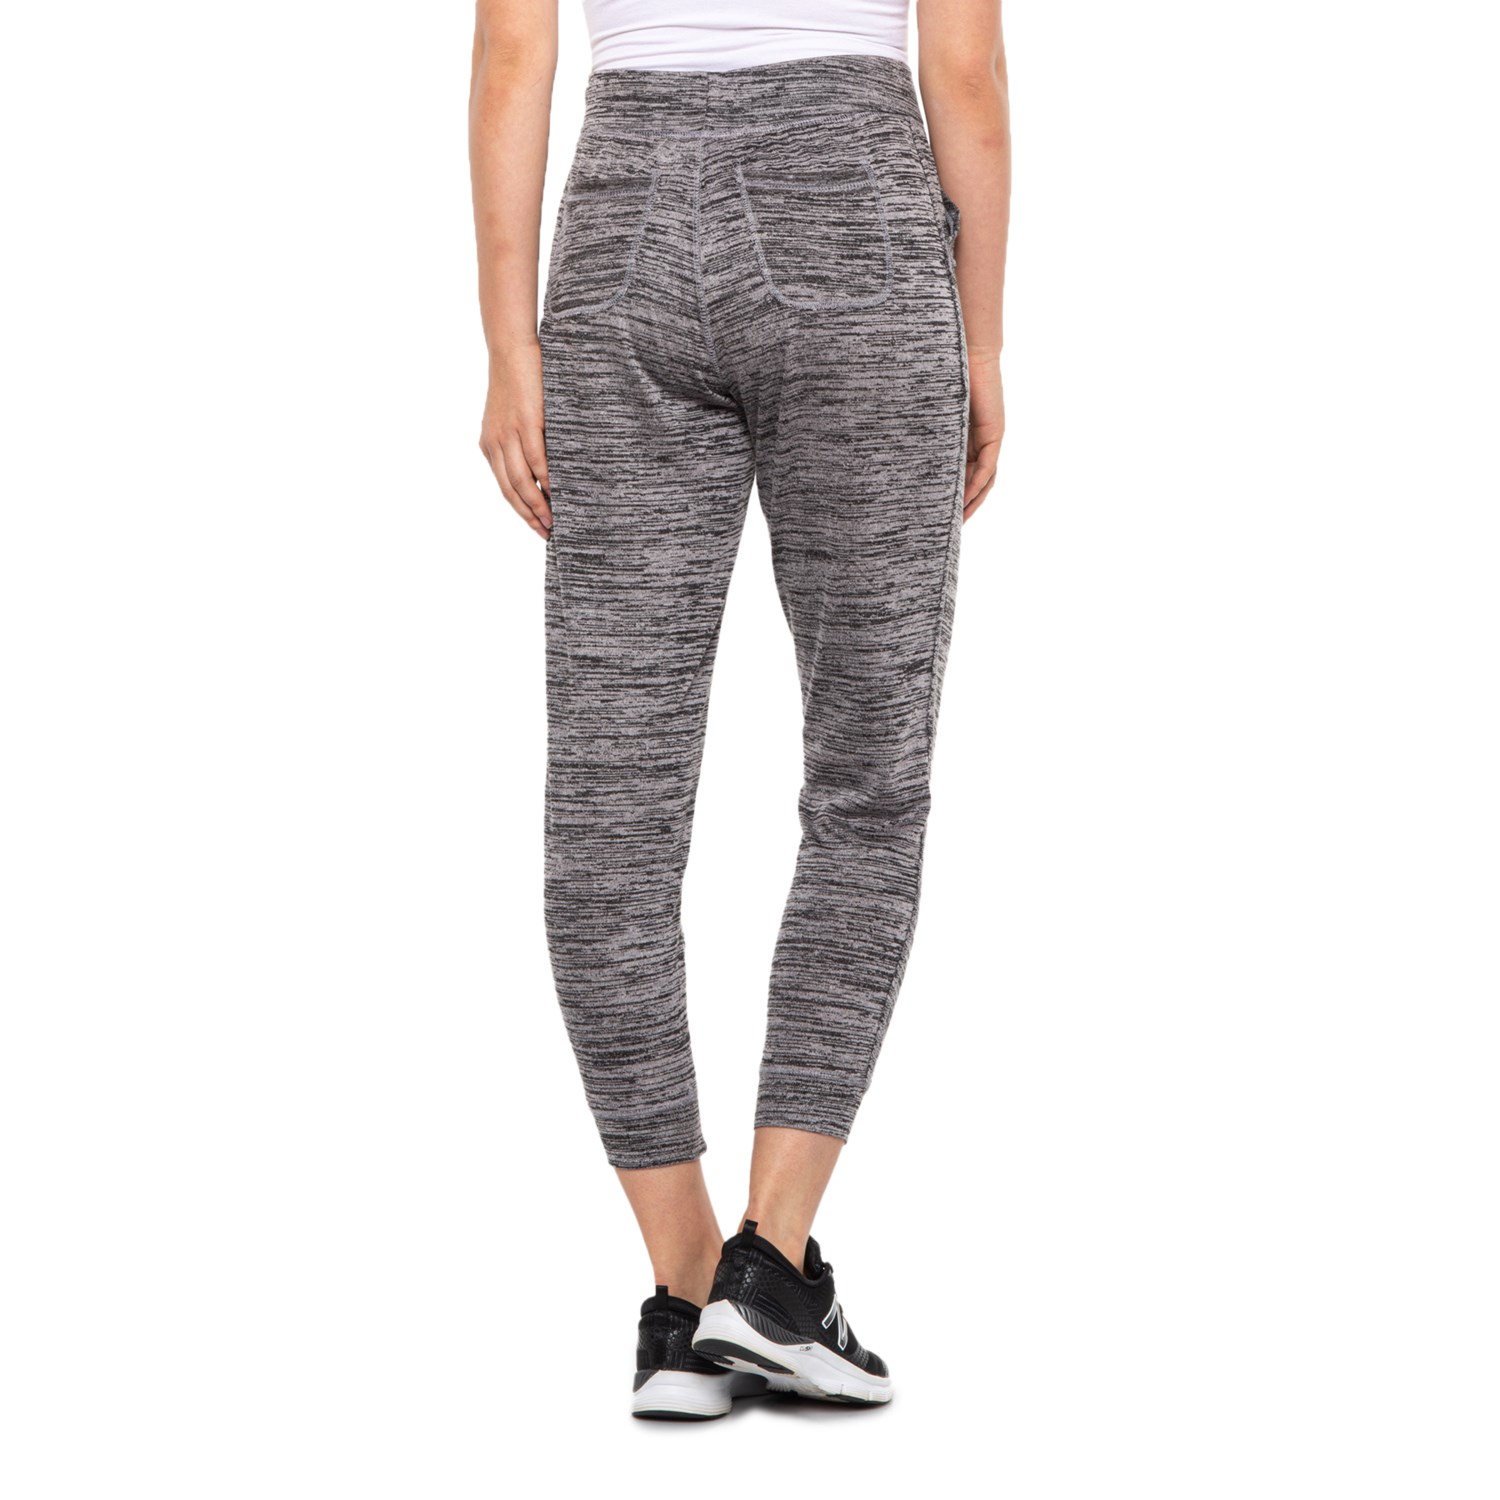 Absolutely Fit Space Dye Joggers (For Women) - Save 60%